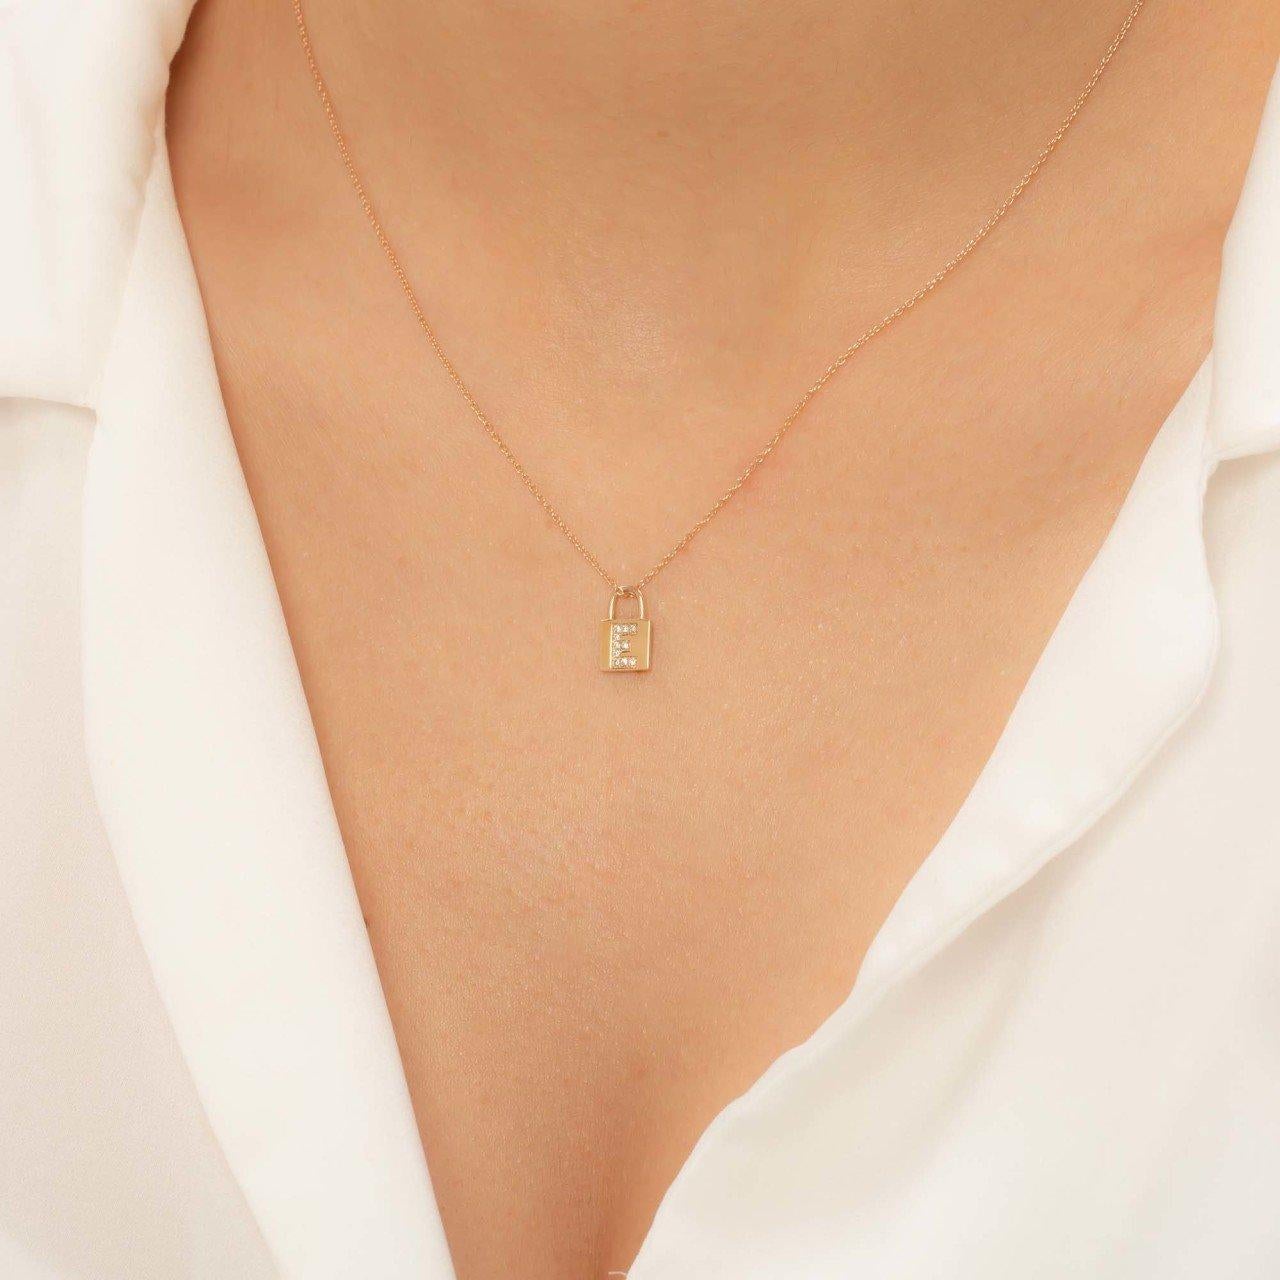 Diamond E Letter Pendant Gold Chain.

14K Solid Gold pieces are made to last forever. 14k gold will not oxidize or discolor, so you can wear your jewelry every day, everywhere.

Gold: 1.88gr 
Diamond: Round Cut 0.06ct F Color SI Clarity 



